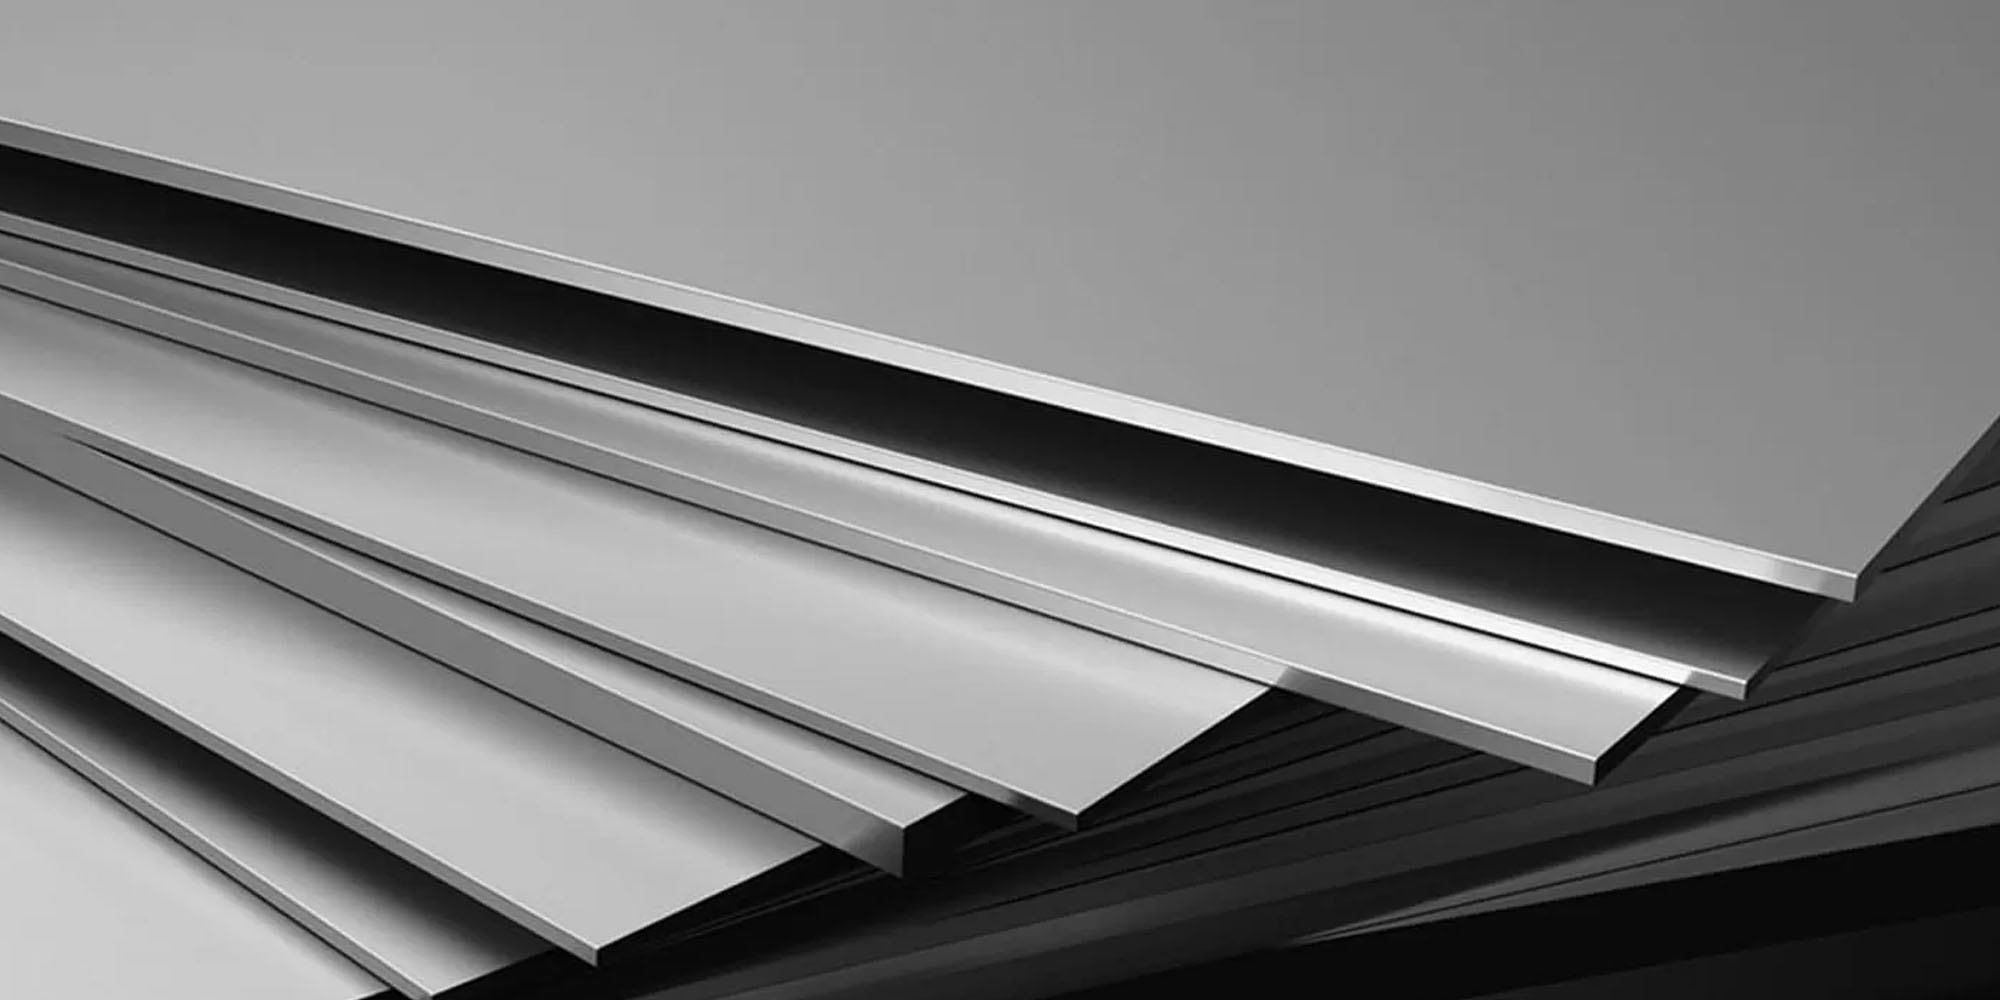 navneet metal corporation supplying high-quality inconel sheets to bharat heavy electricals ltd